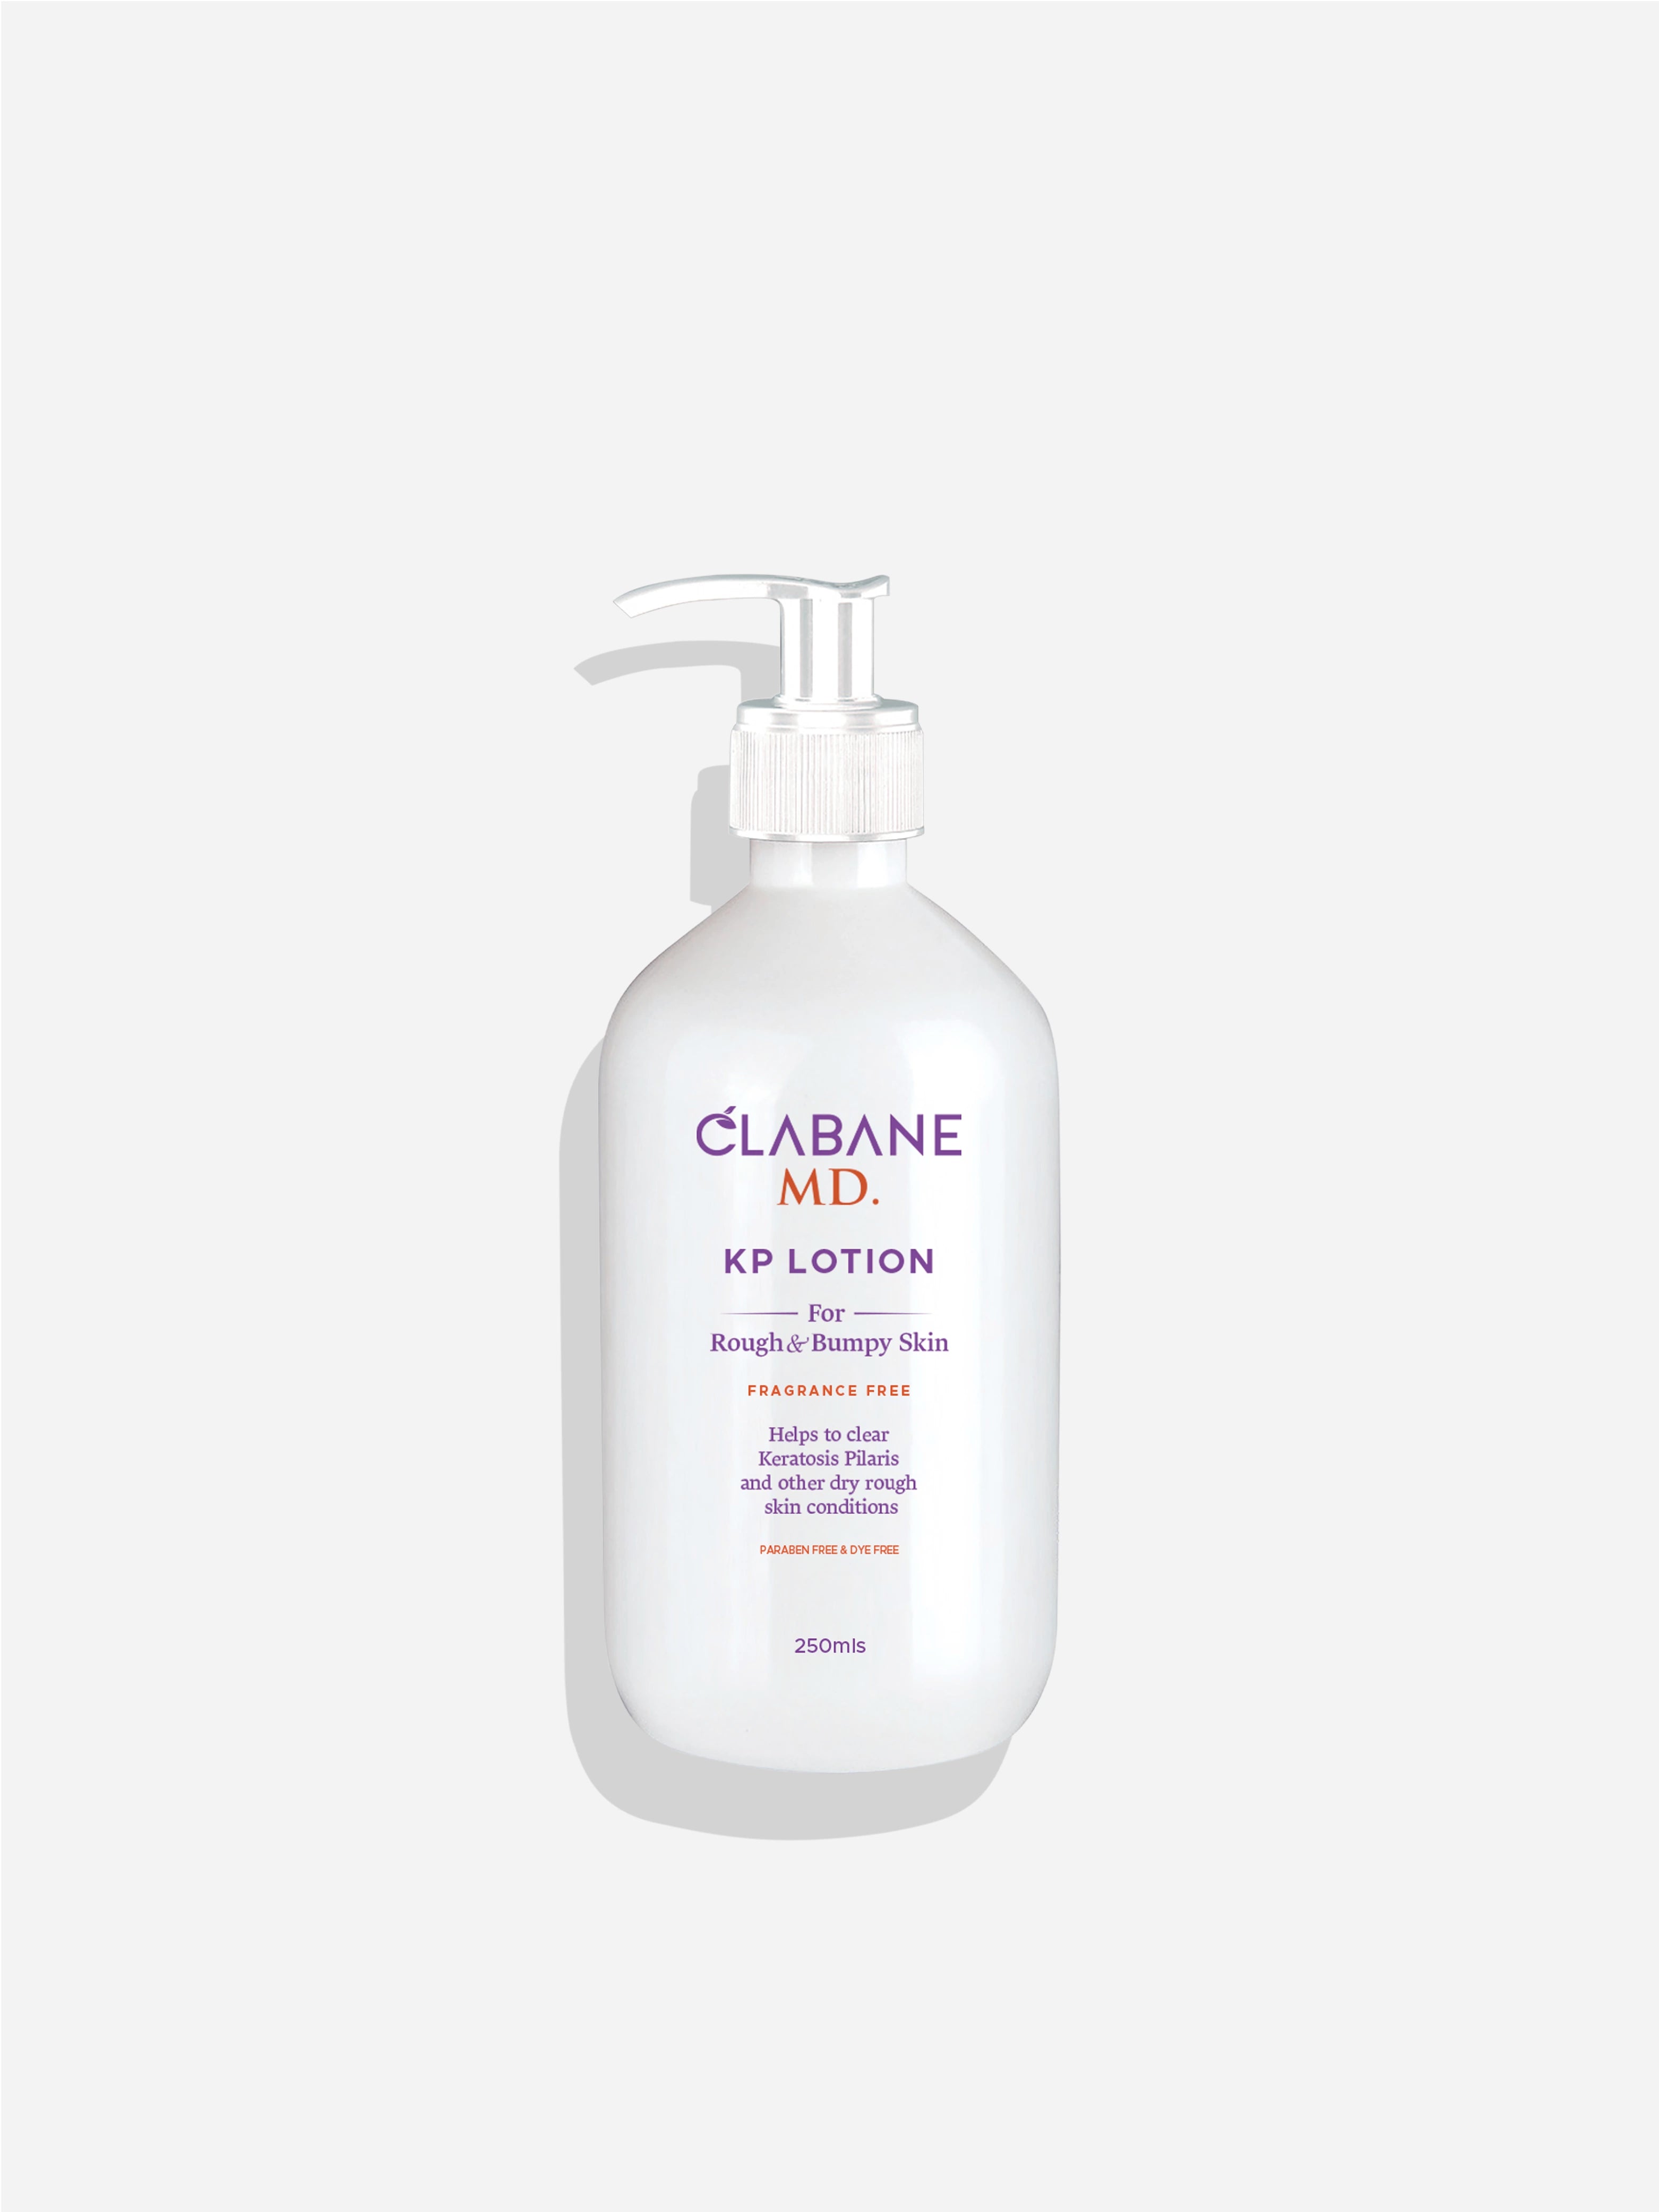 Clabane MD KP Lotion for Rough and Bumpy Skin